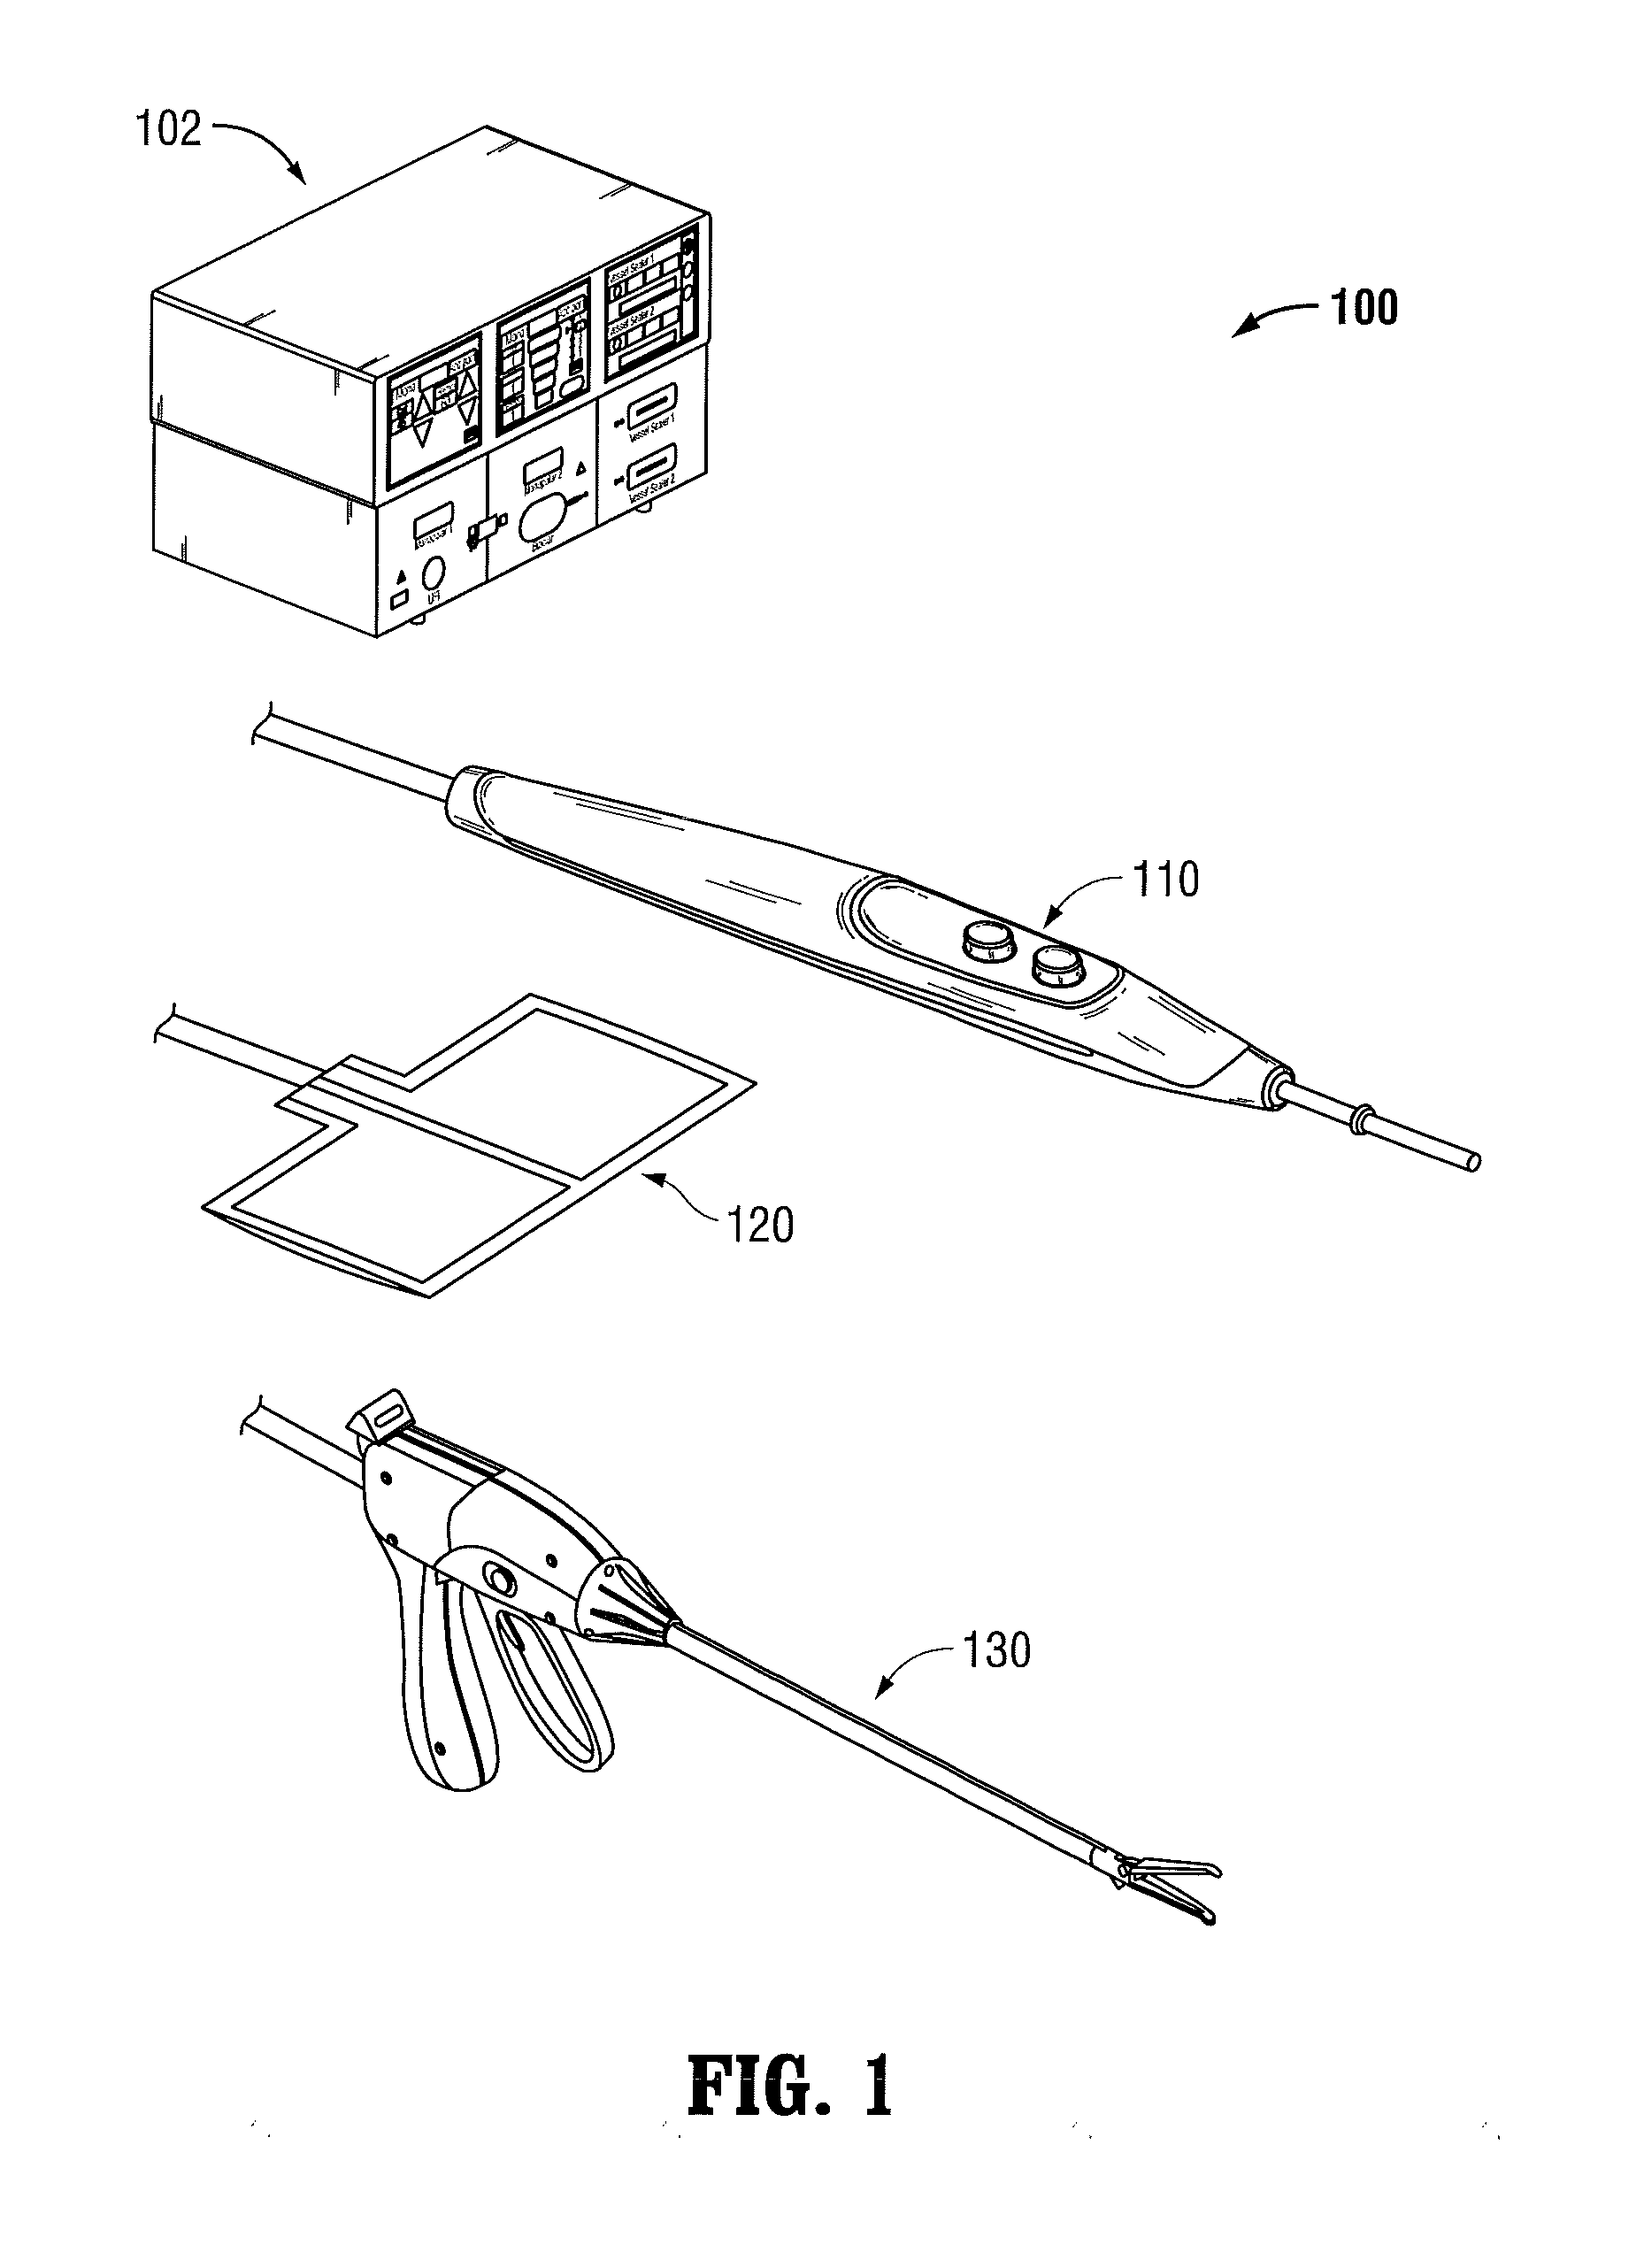 Systems and methods for measuring tissue impedance through an electrosurgical cable